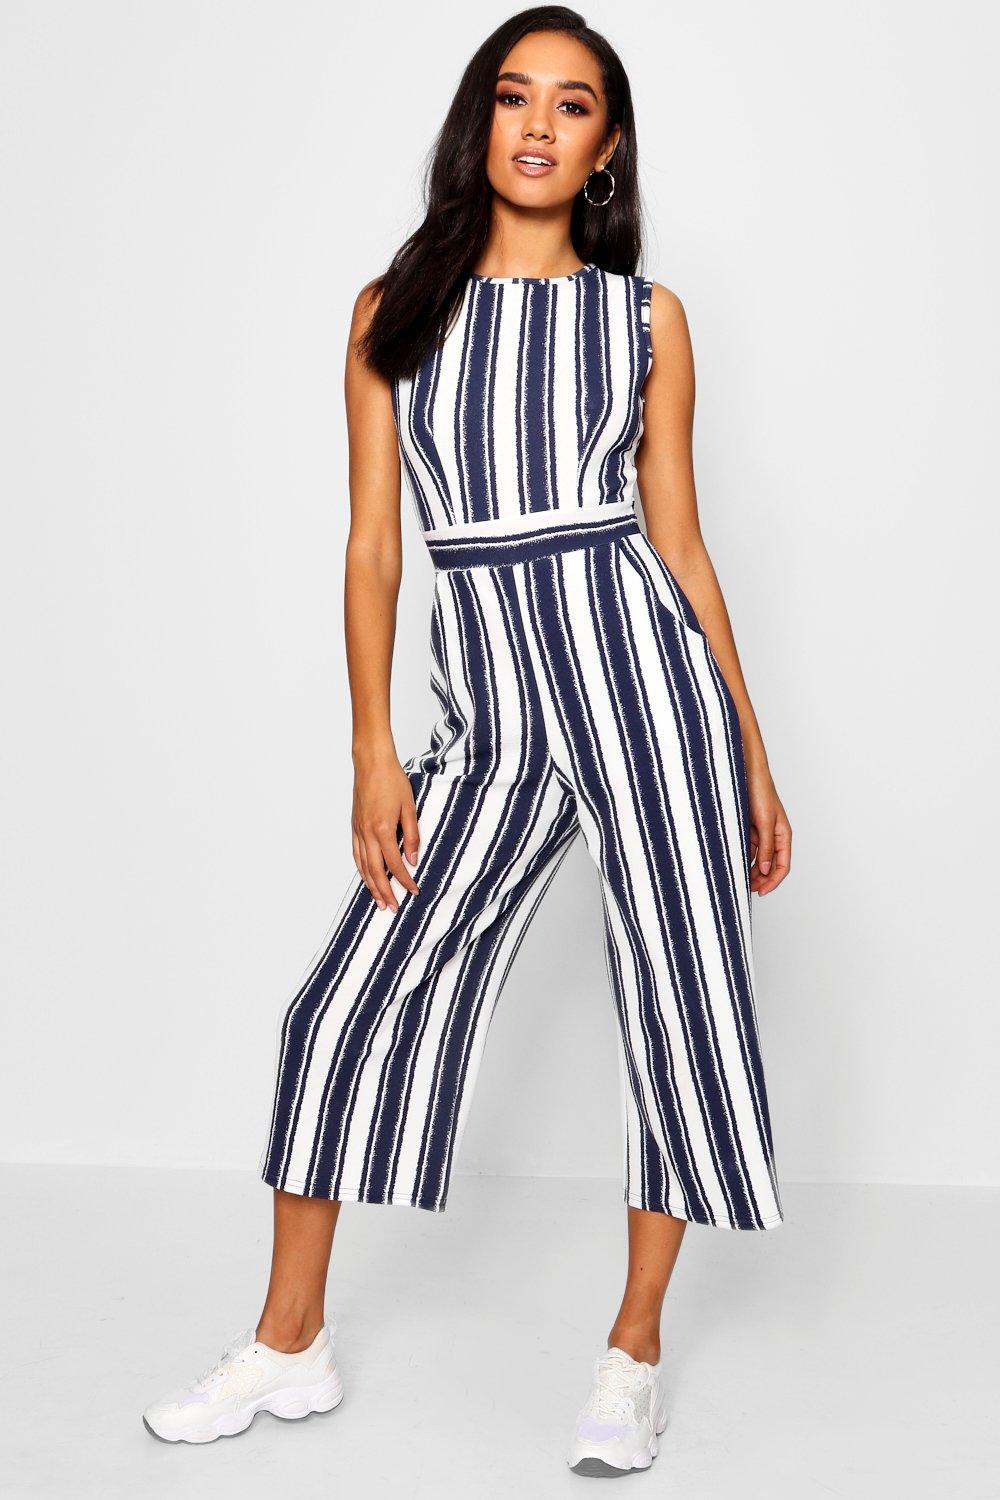 navy and white striped jumpsuit